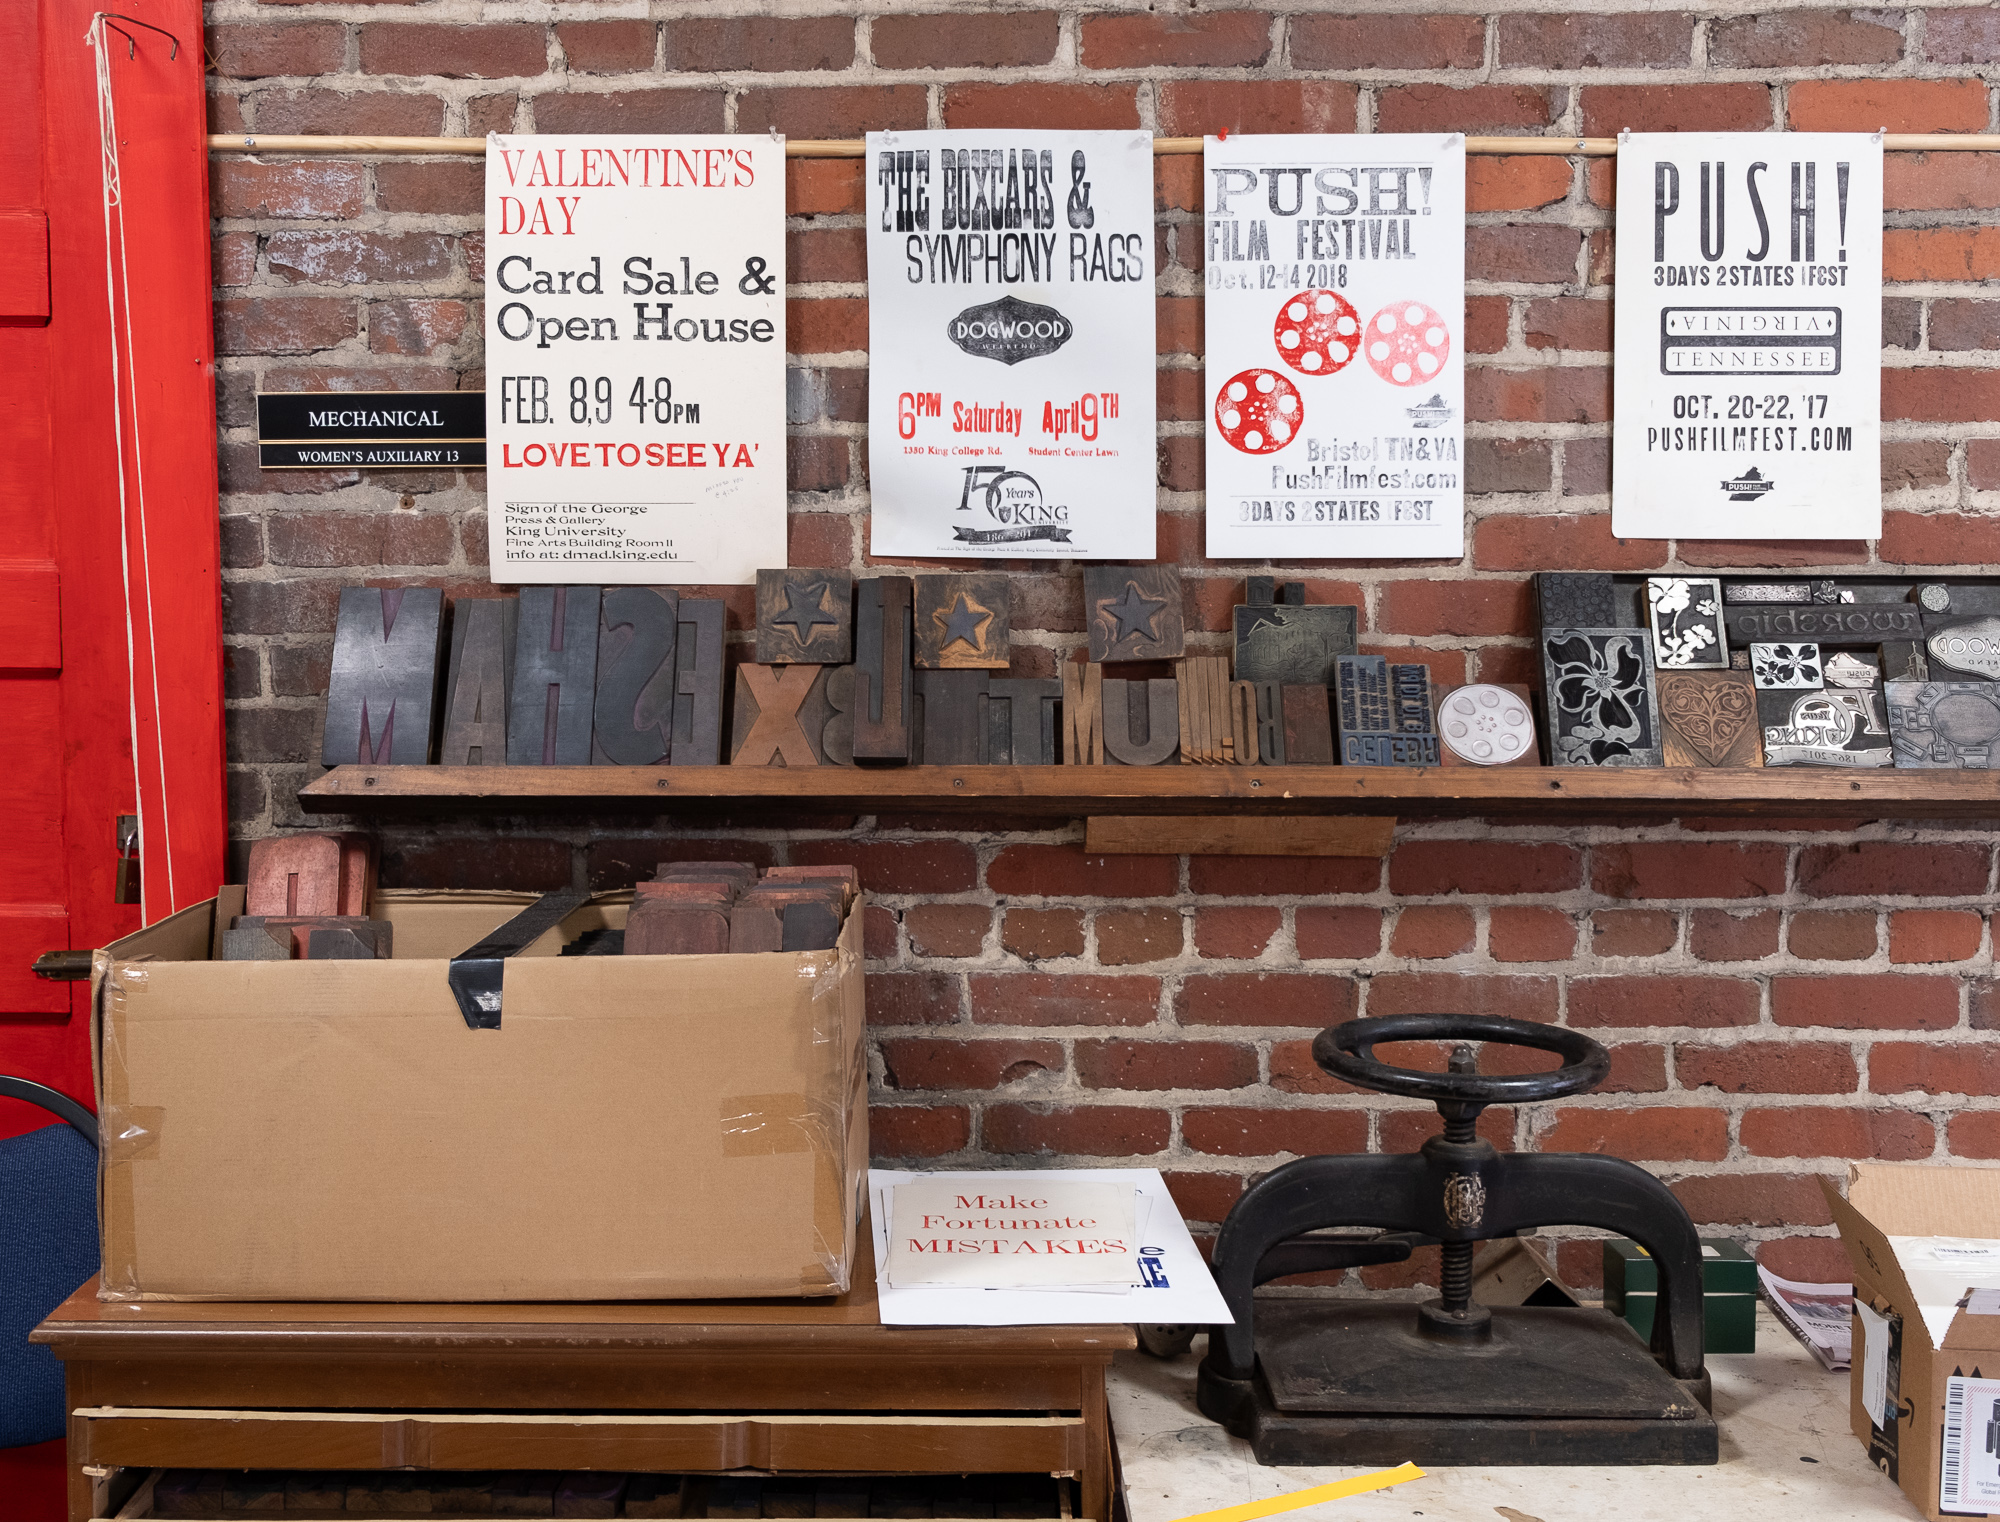 A scene inside of a letterpress print shop. Posters are hung in a line against a brick wall. Wooden letters and type face are on a shelf under the posters. A black hand press and box full of type is on the table under the shelf.